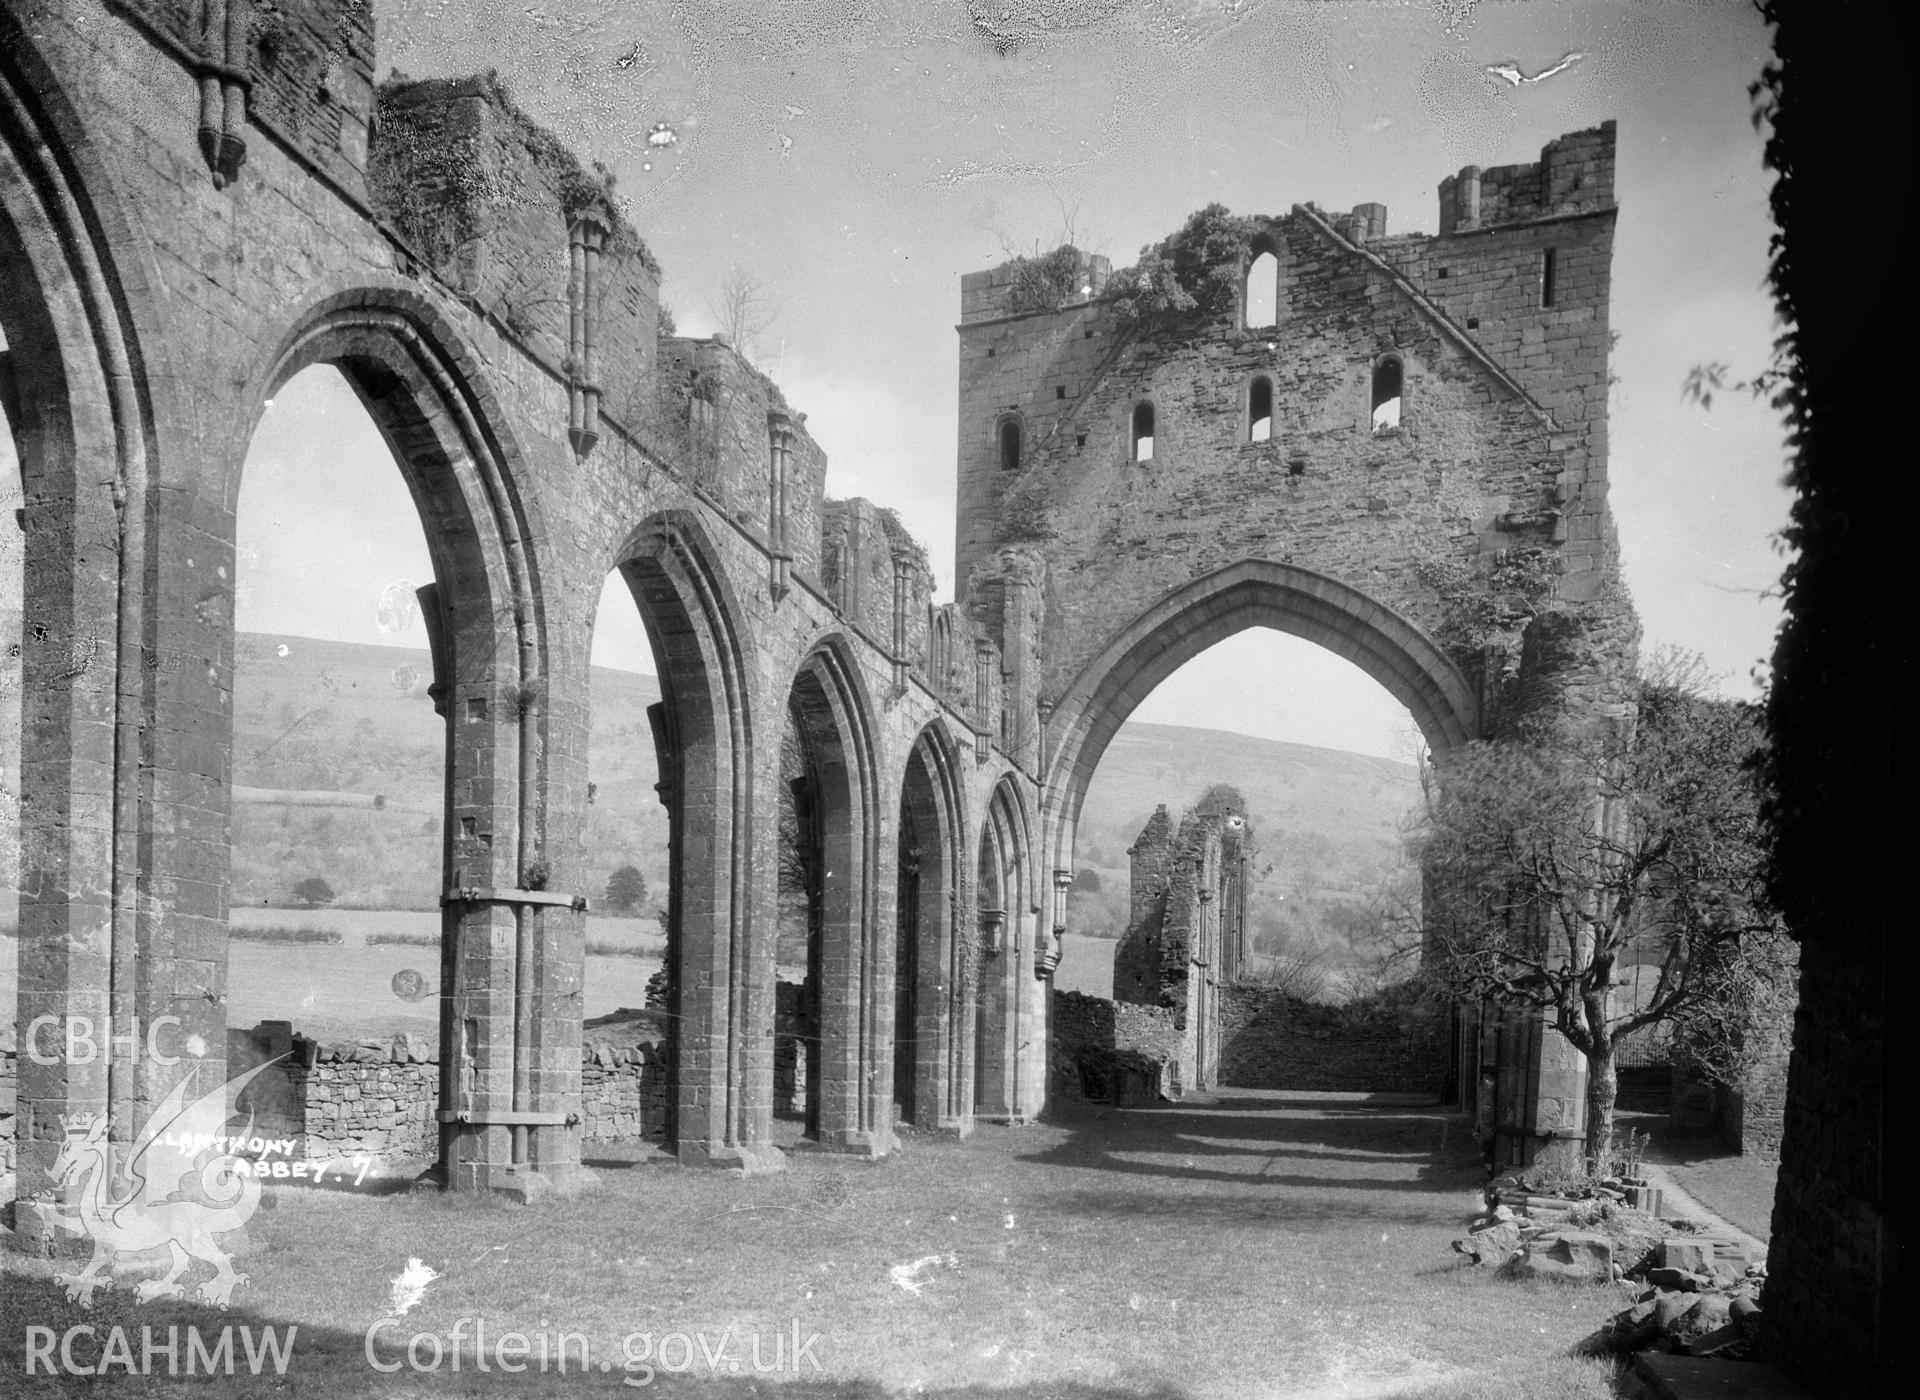 View of Llanthony Priory.